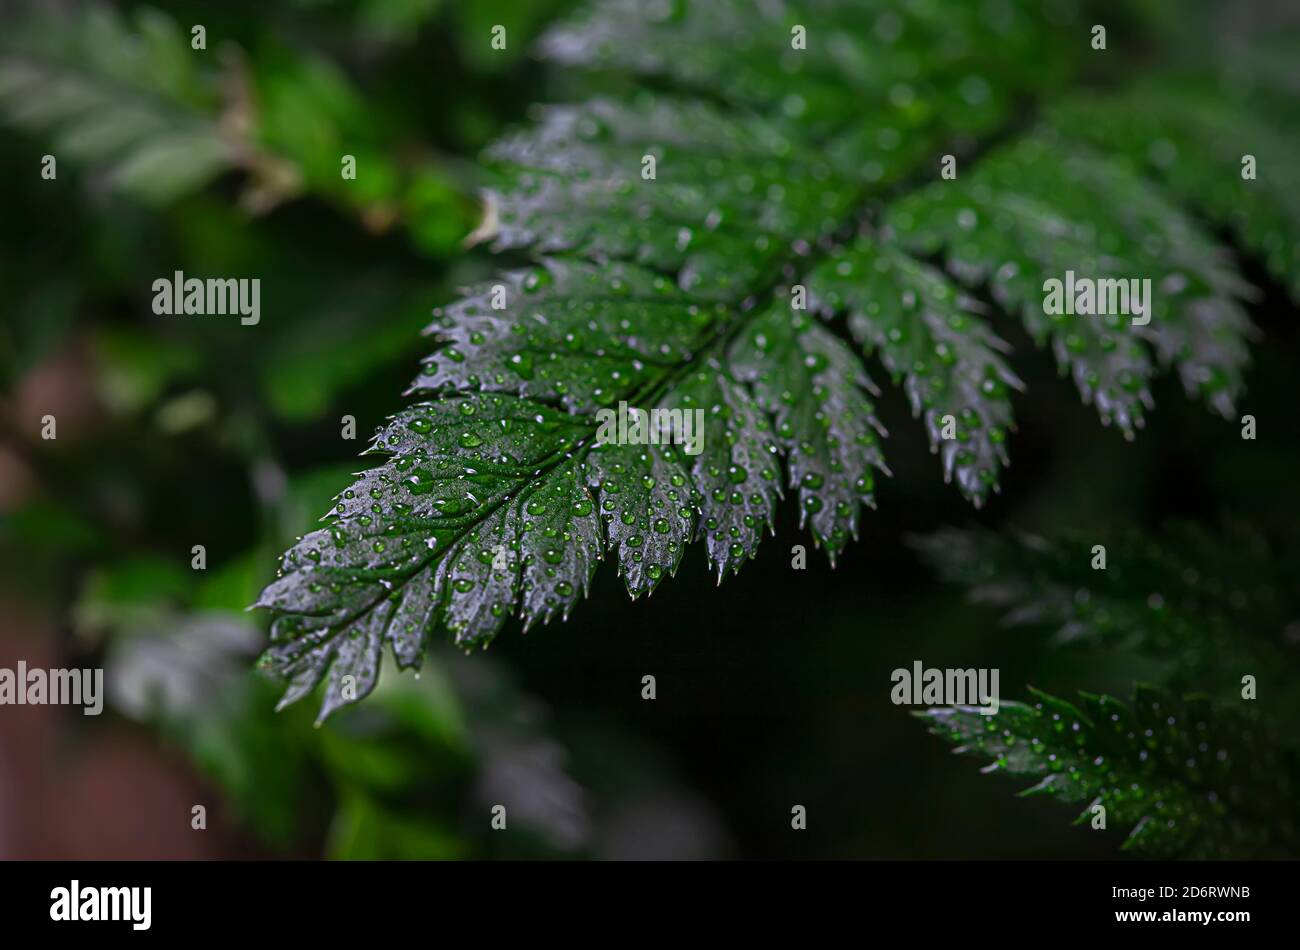 Fern close-up, with water drops after rain. Stock Photo